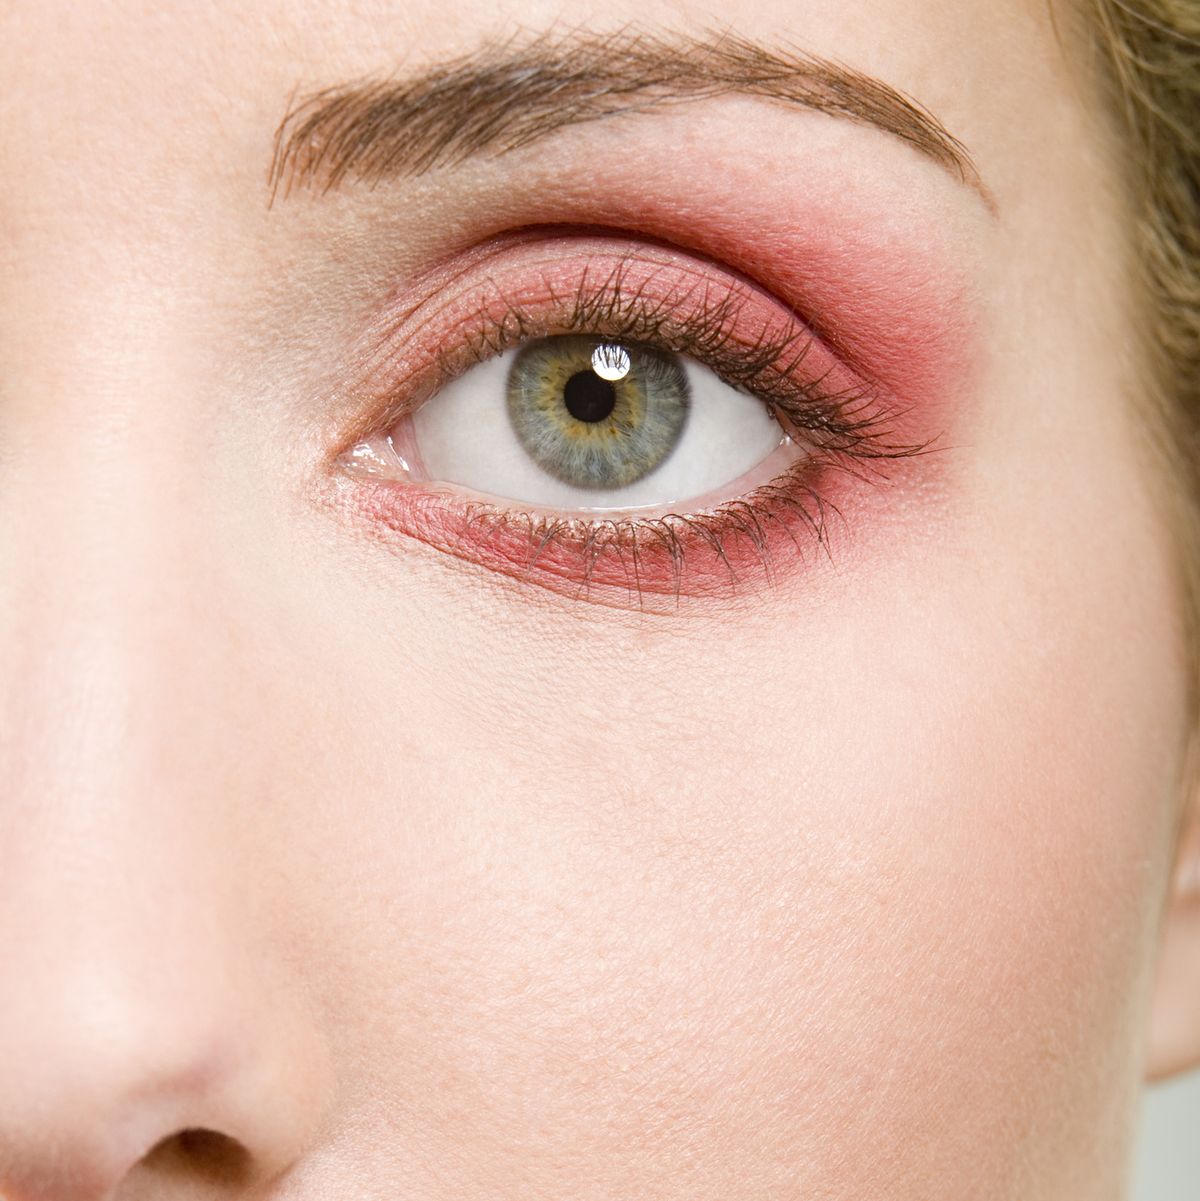 Itchy Eyes? Your Eye Makeup Might Be the Culprit - Up North Parent